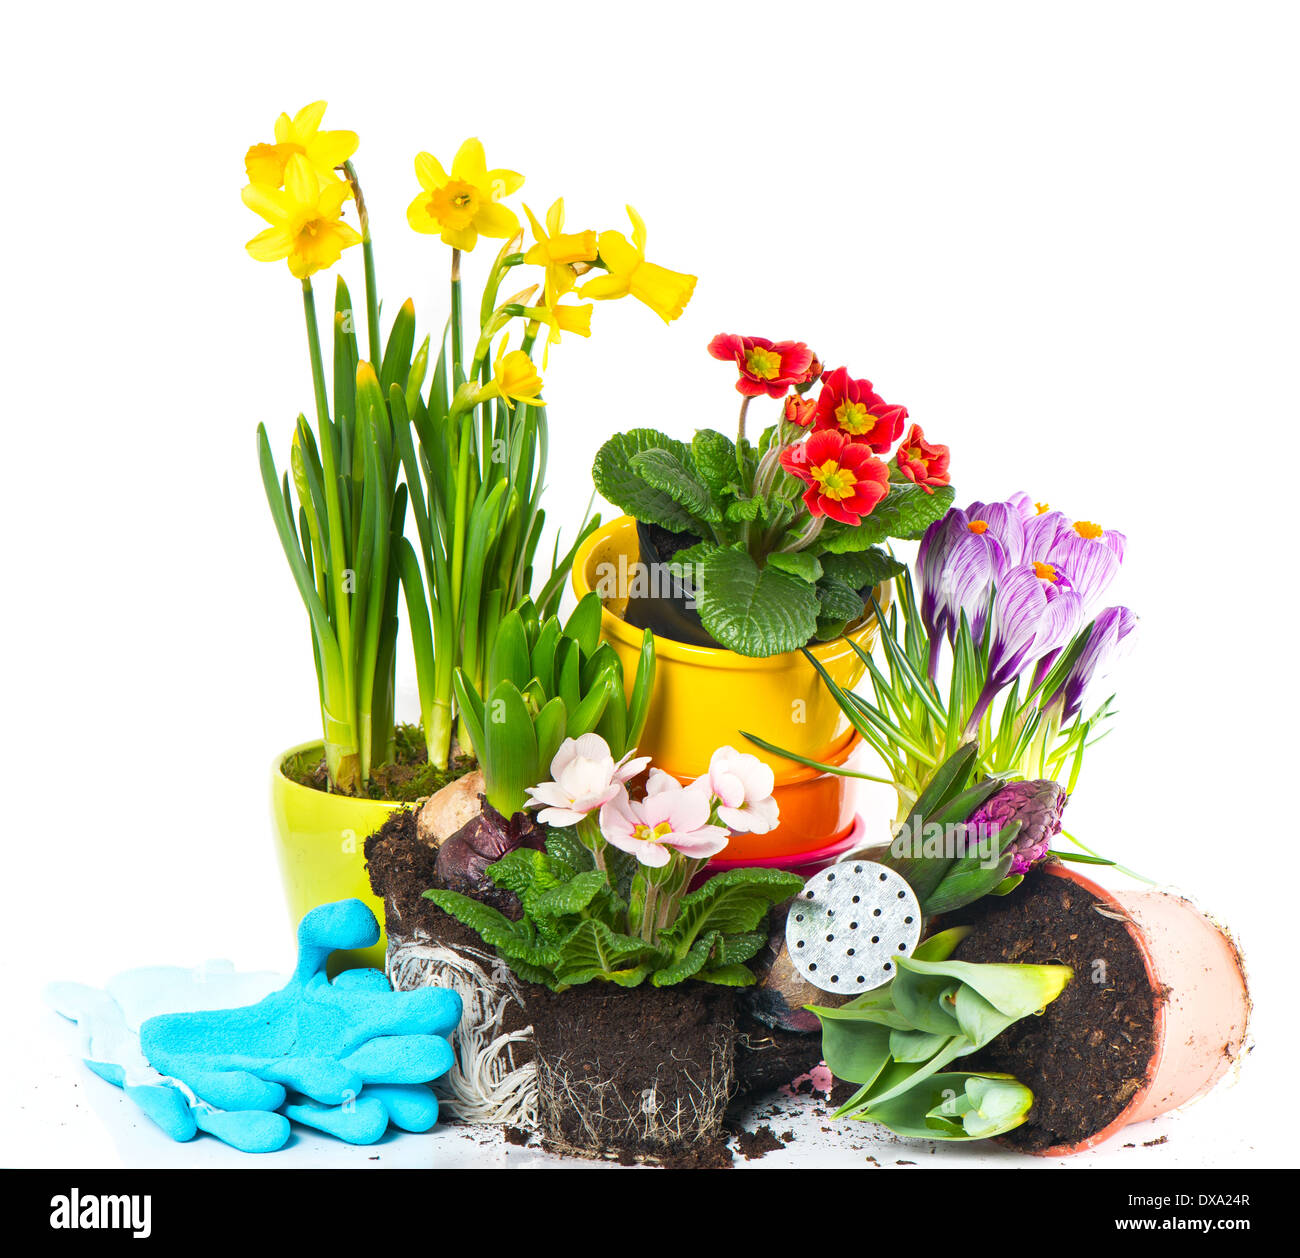 spring flowers narcissus, crocus, tulip, hyacinth and primula. gardening concept Stock Photo